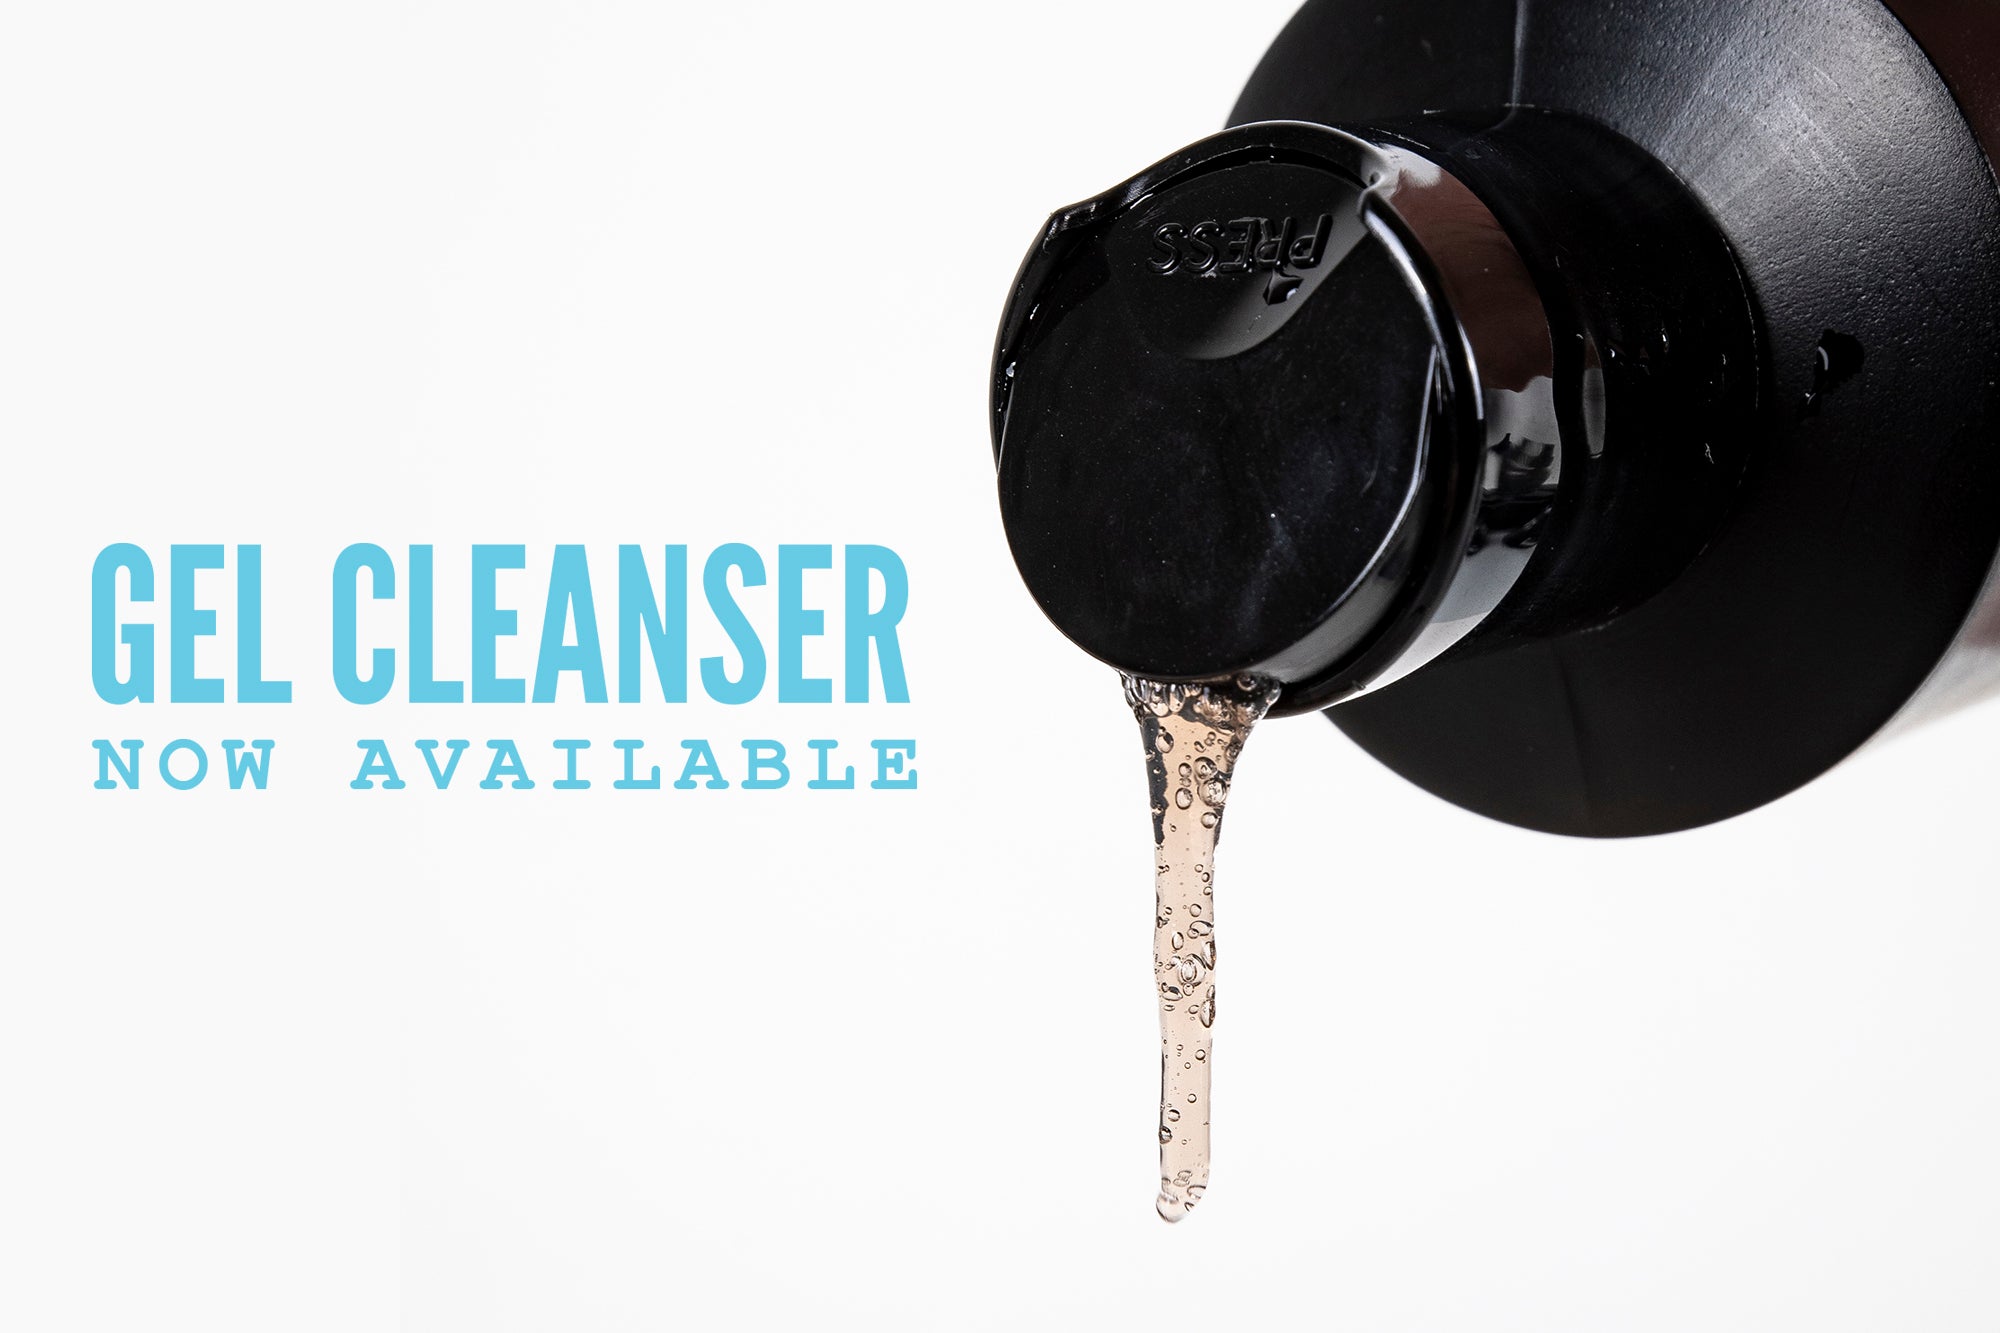 NEW! Gel Cleanser is now available!